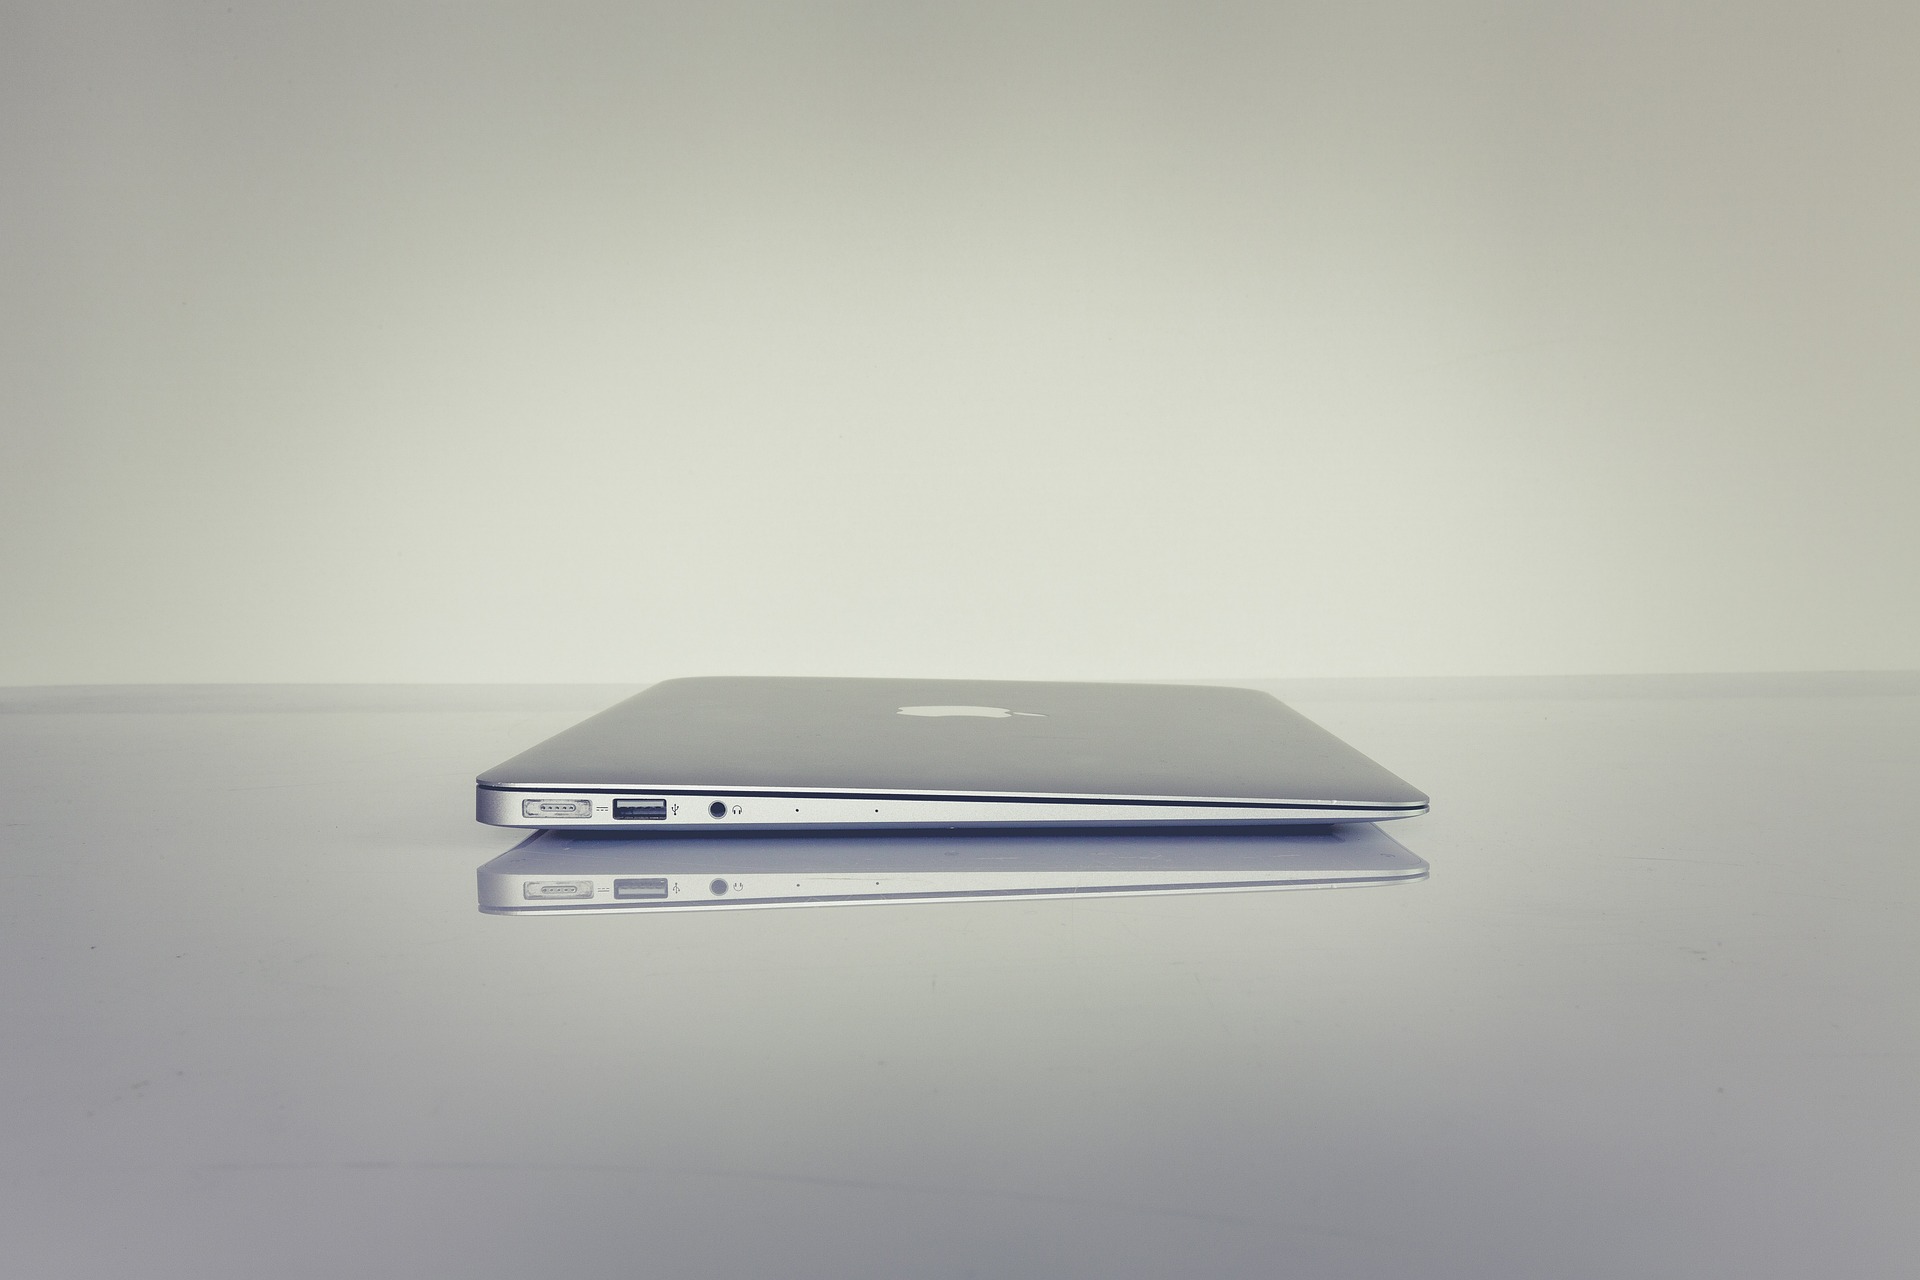 A closed MacBook lies on a grey surface.